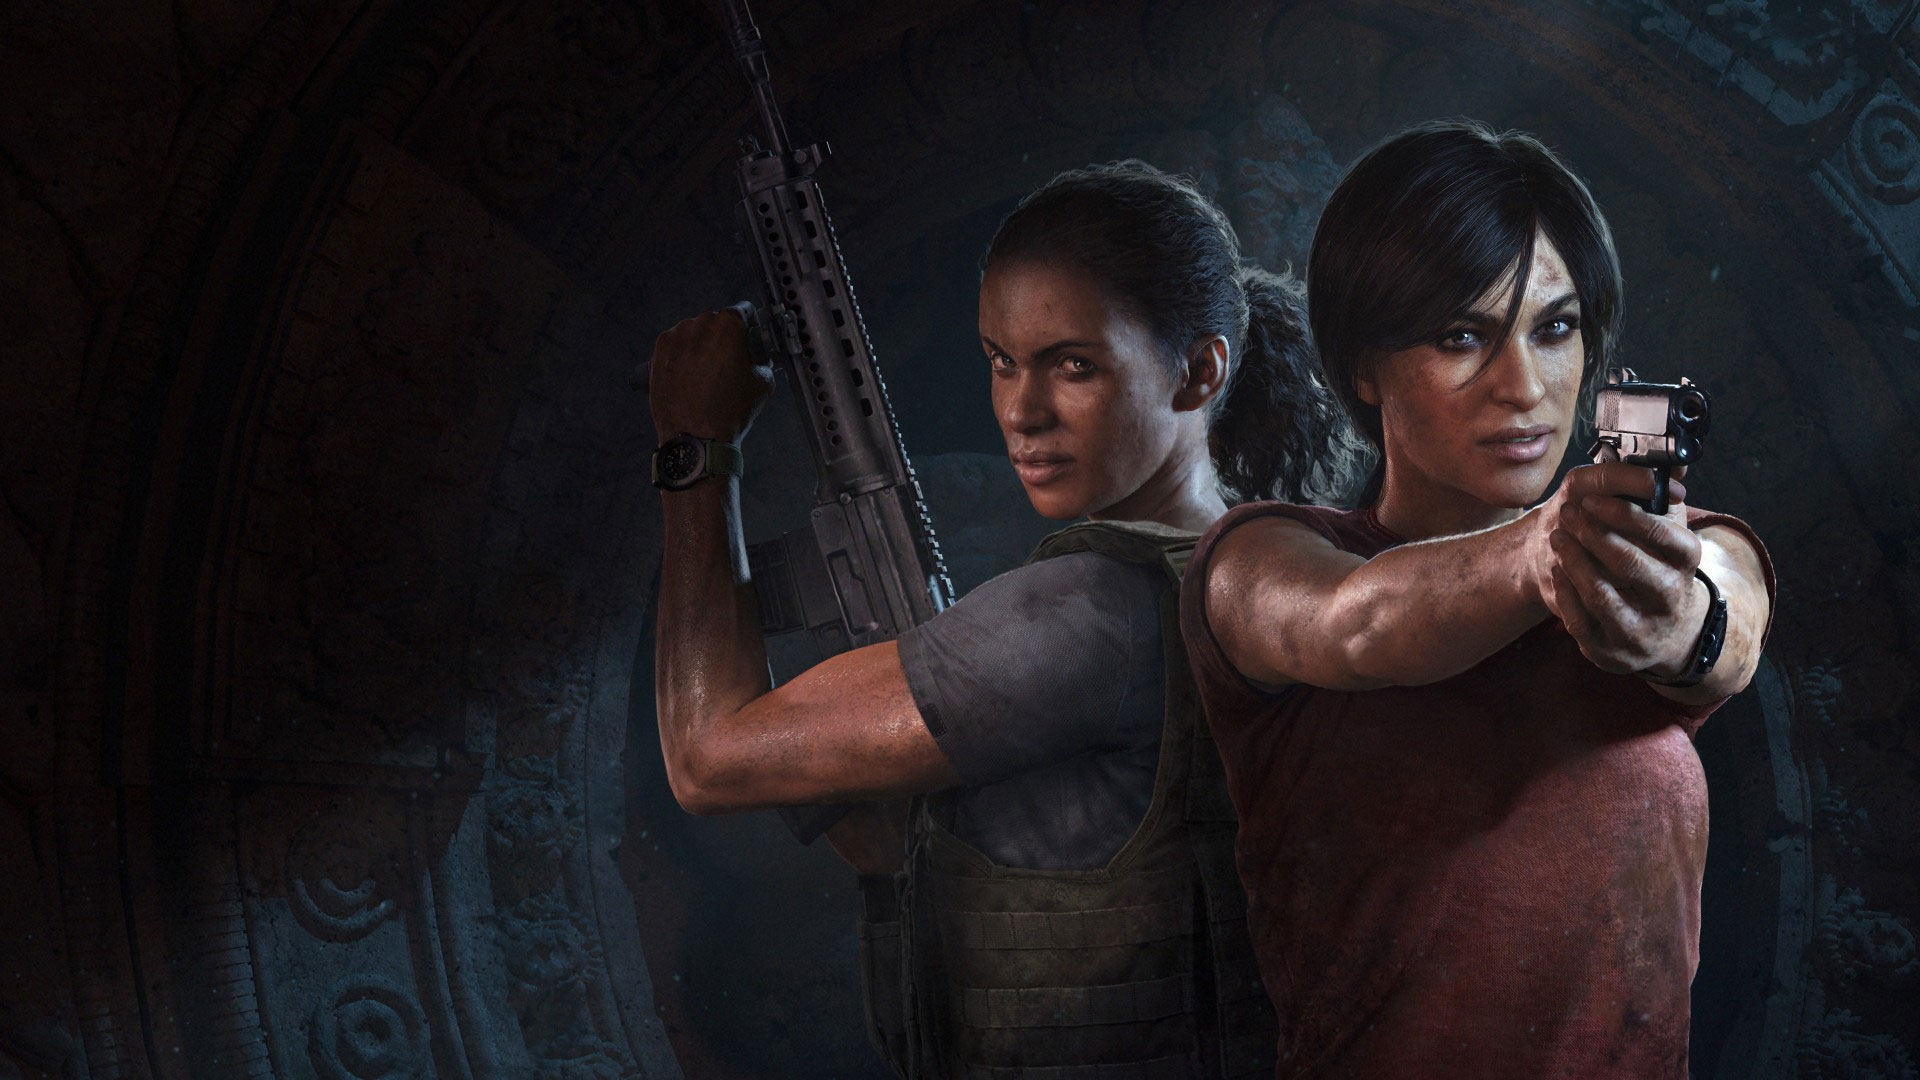 Uncharted: The Lost Legacy teatro das sombras